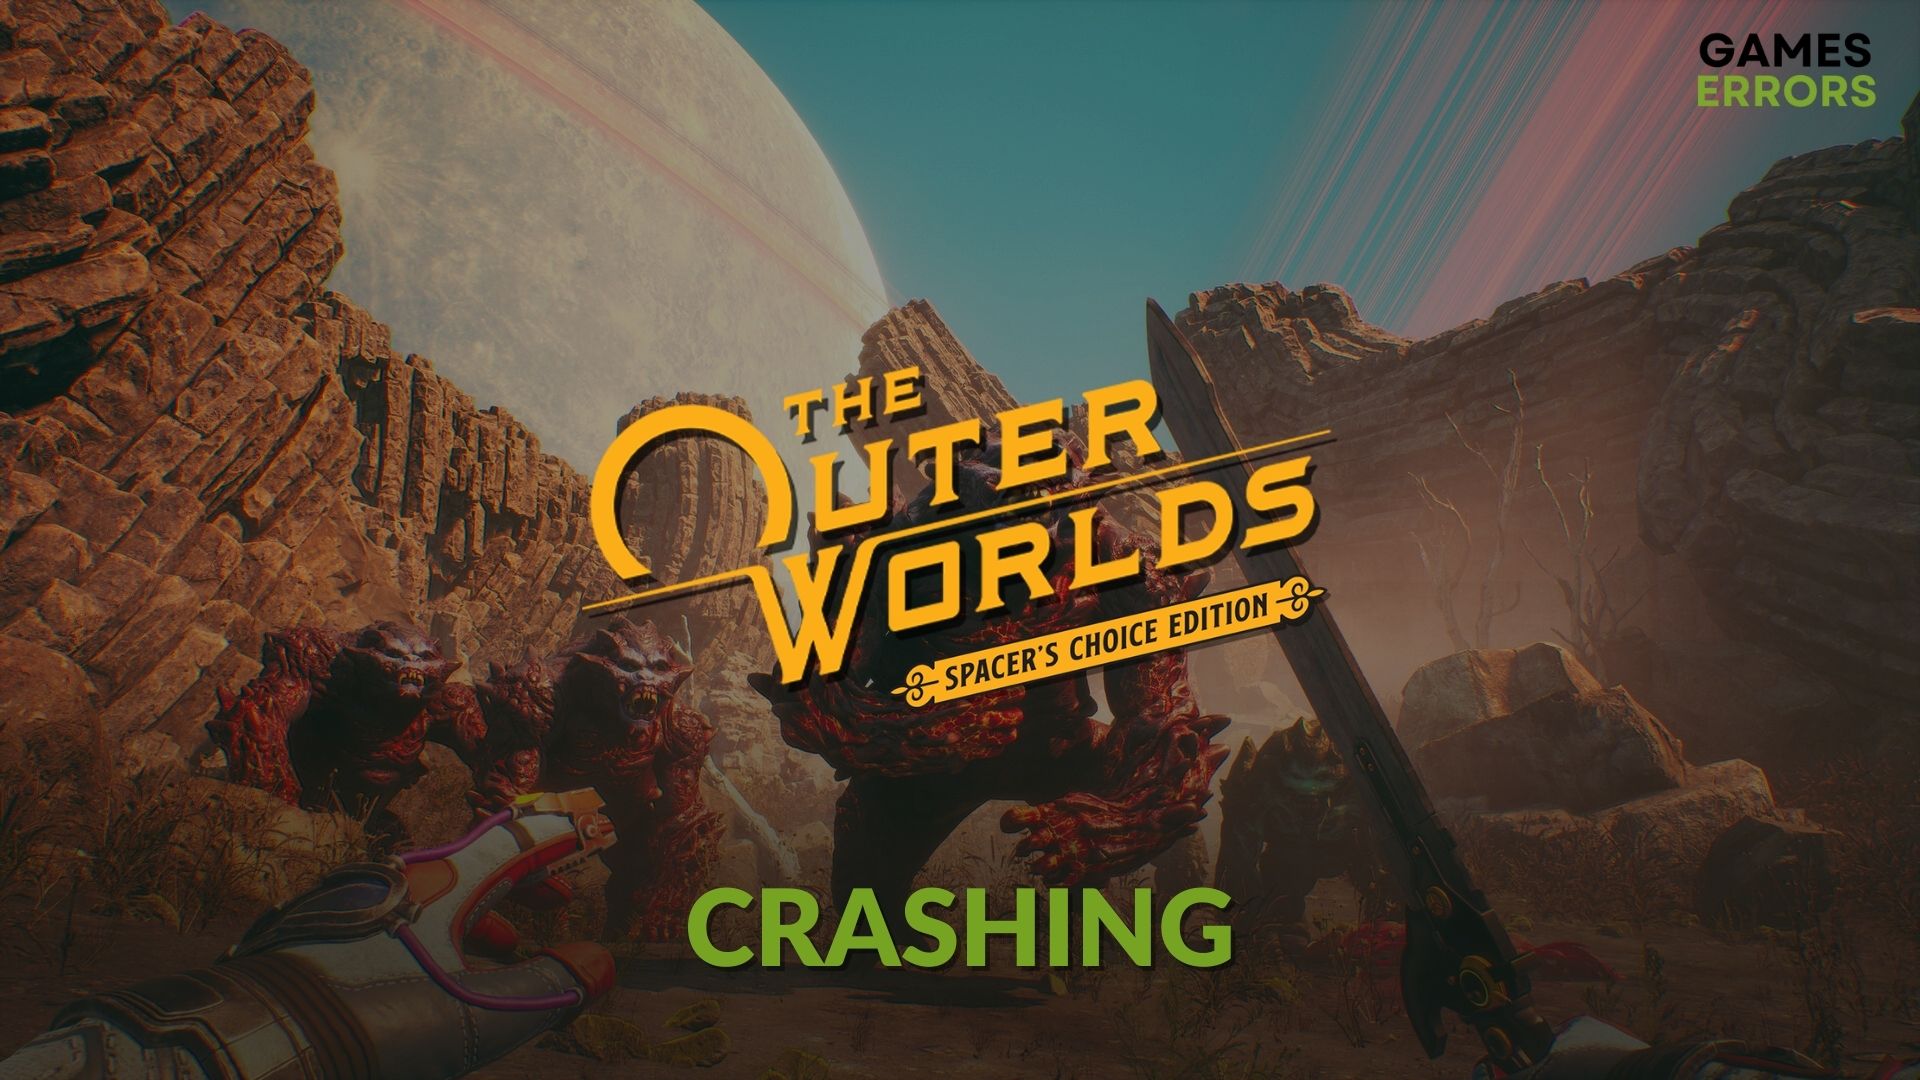 download The Outer Worlds: Spacer